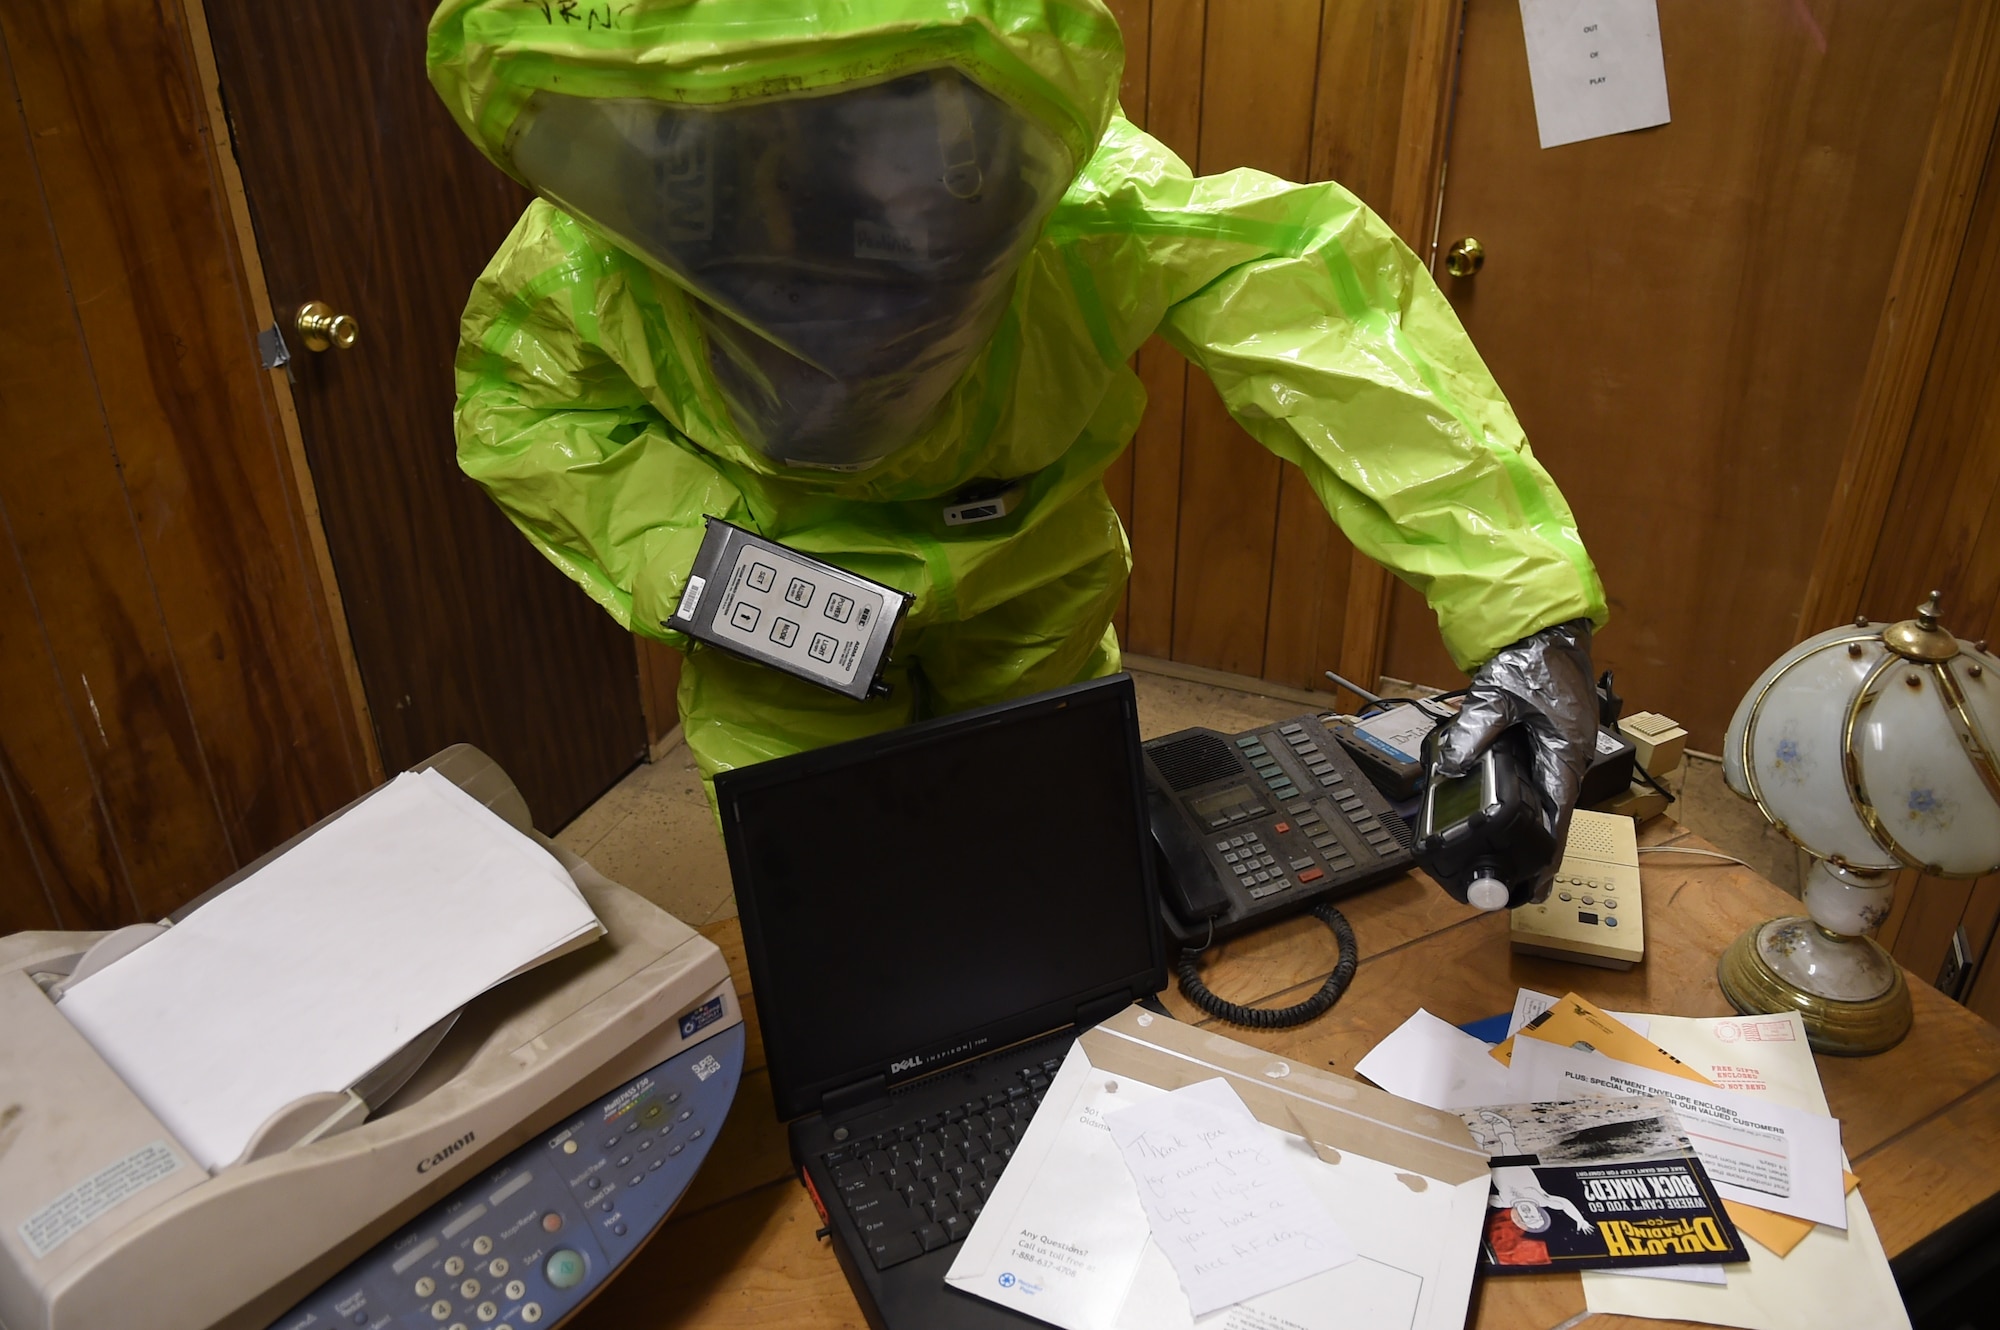 Senior Airman Tony Pauline scans an office desk for a potential chemical agent during a training exercise March 17, 2015, in the Memorial Tunnel at the Center for National Response in Gallagher, W.Va. This training is part of the annual Black Flag exercise for first responders. Pauline is a bioenvironmental engineering technician with the 779th Aerospace Medical Squadron at Joint Base Andrews, Md. (U.S. Air Force photo/Senior Airman Joshua R. M. Dewberry)